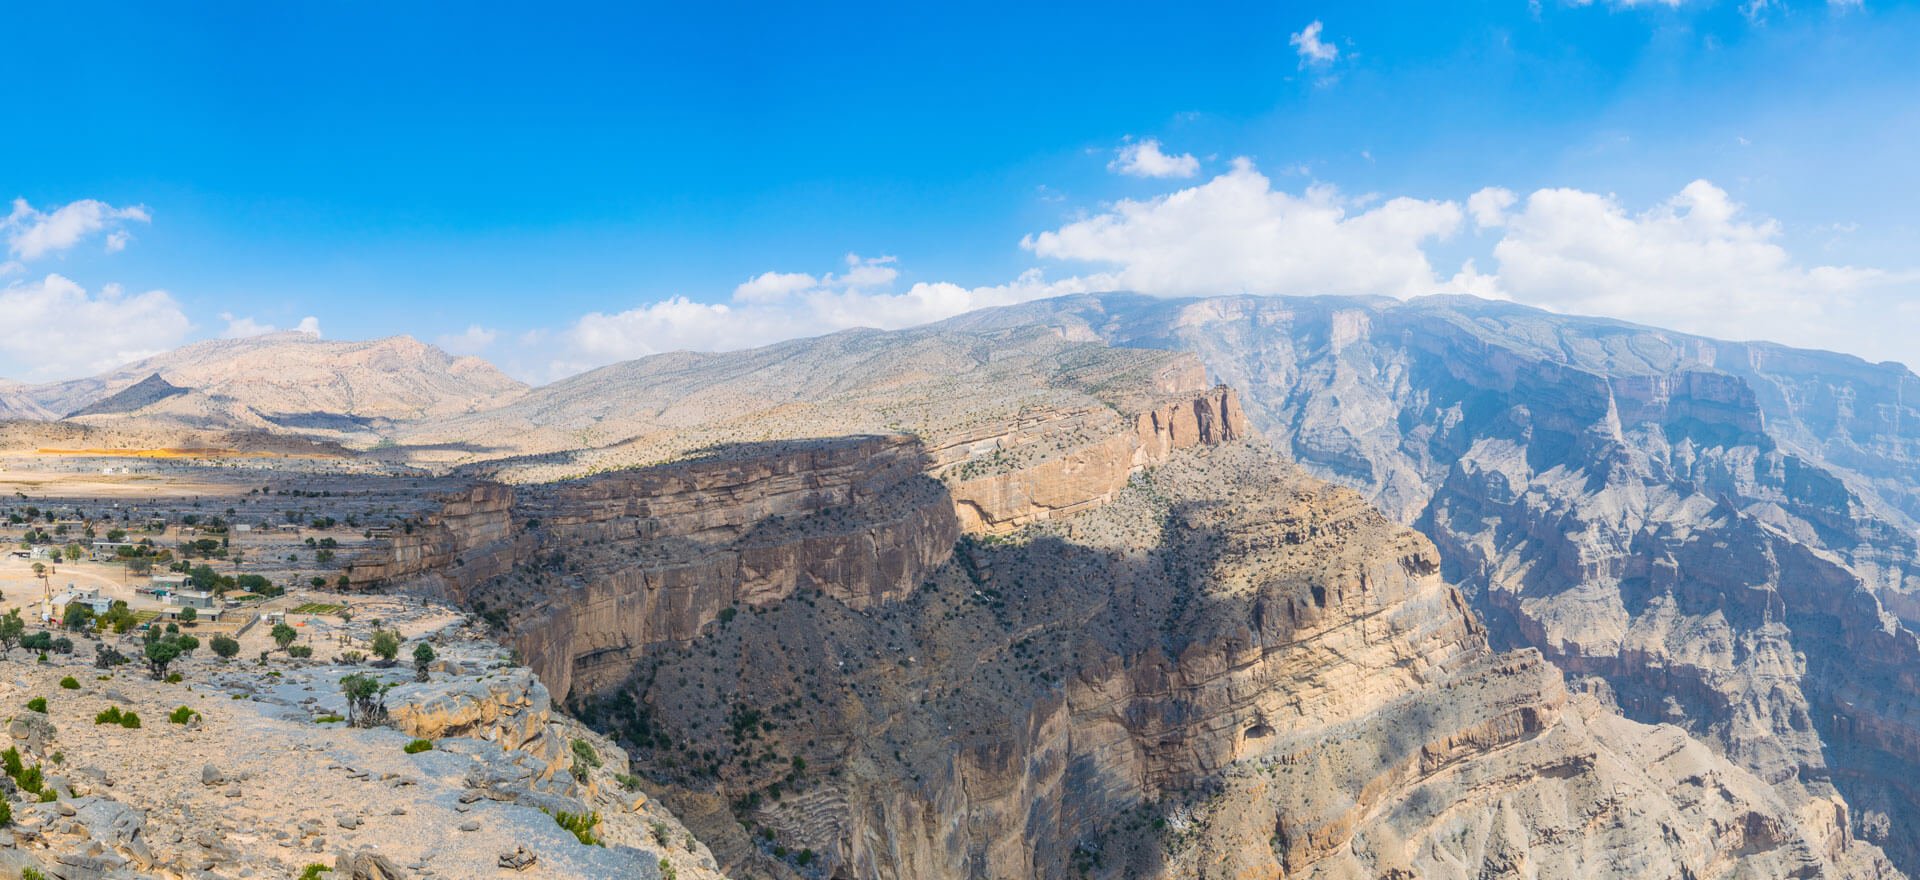 Mountain scenery in the Jebel Akhdar range - Oman Holidays and Tours